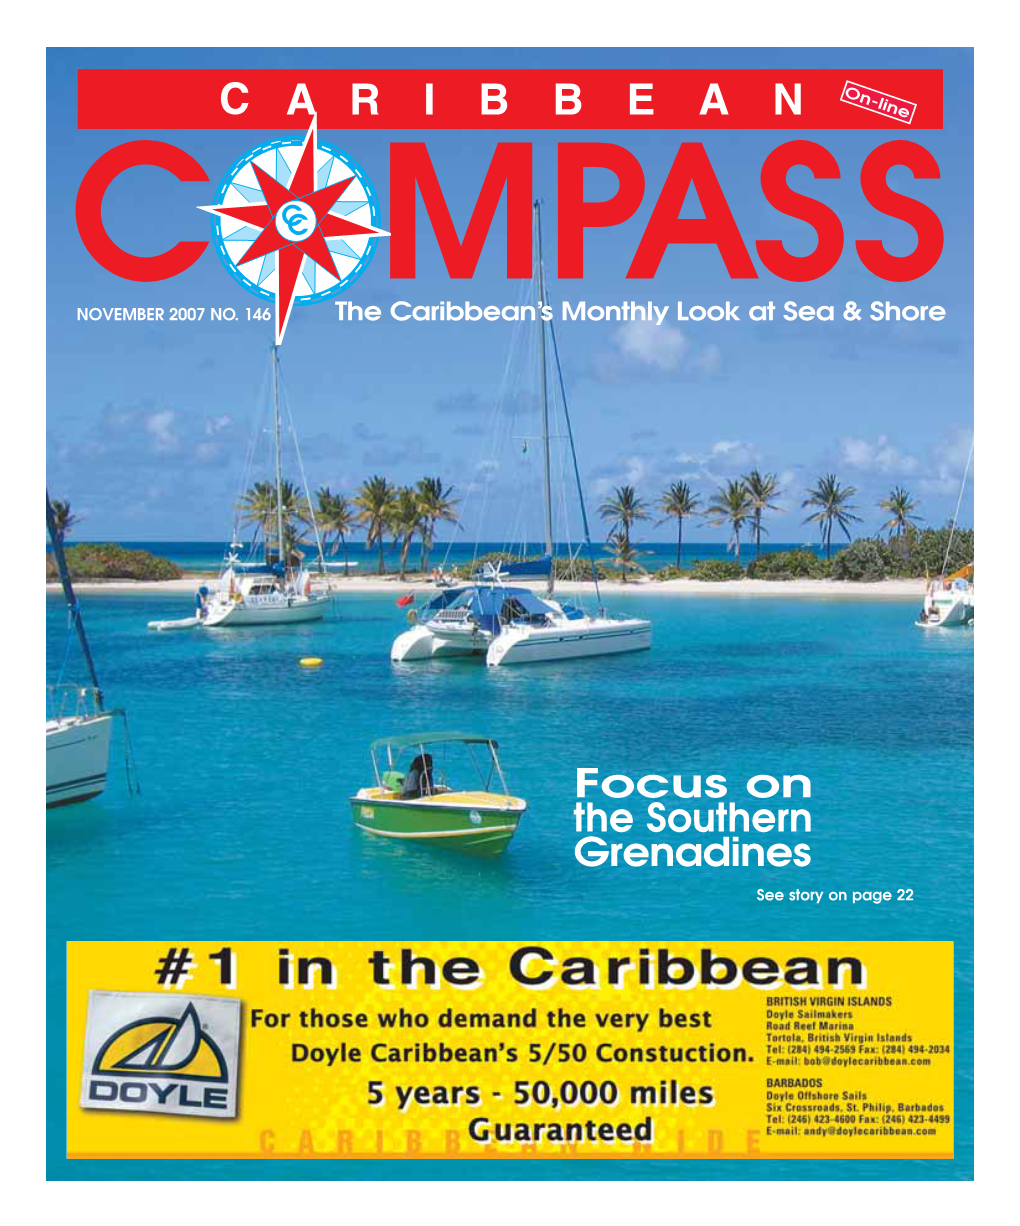 Focus on the Southern Grenadines